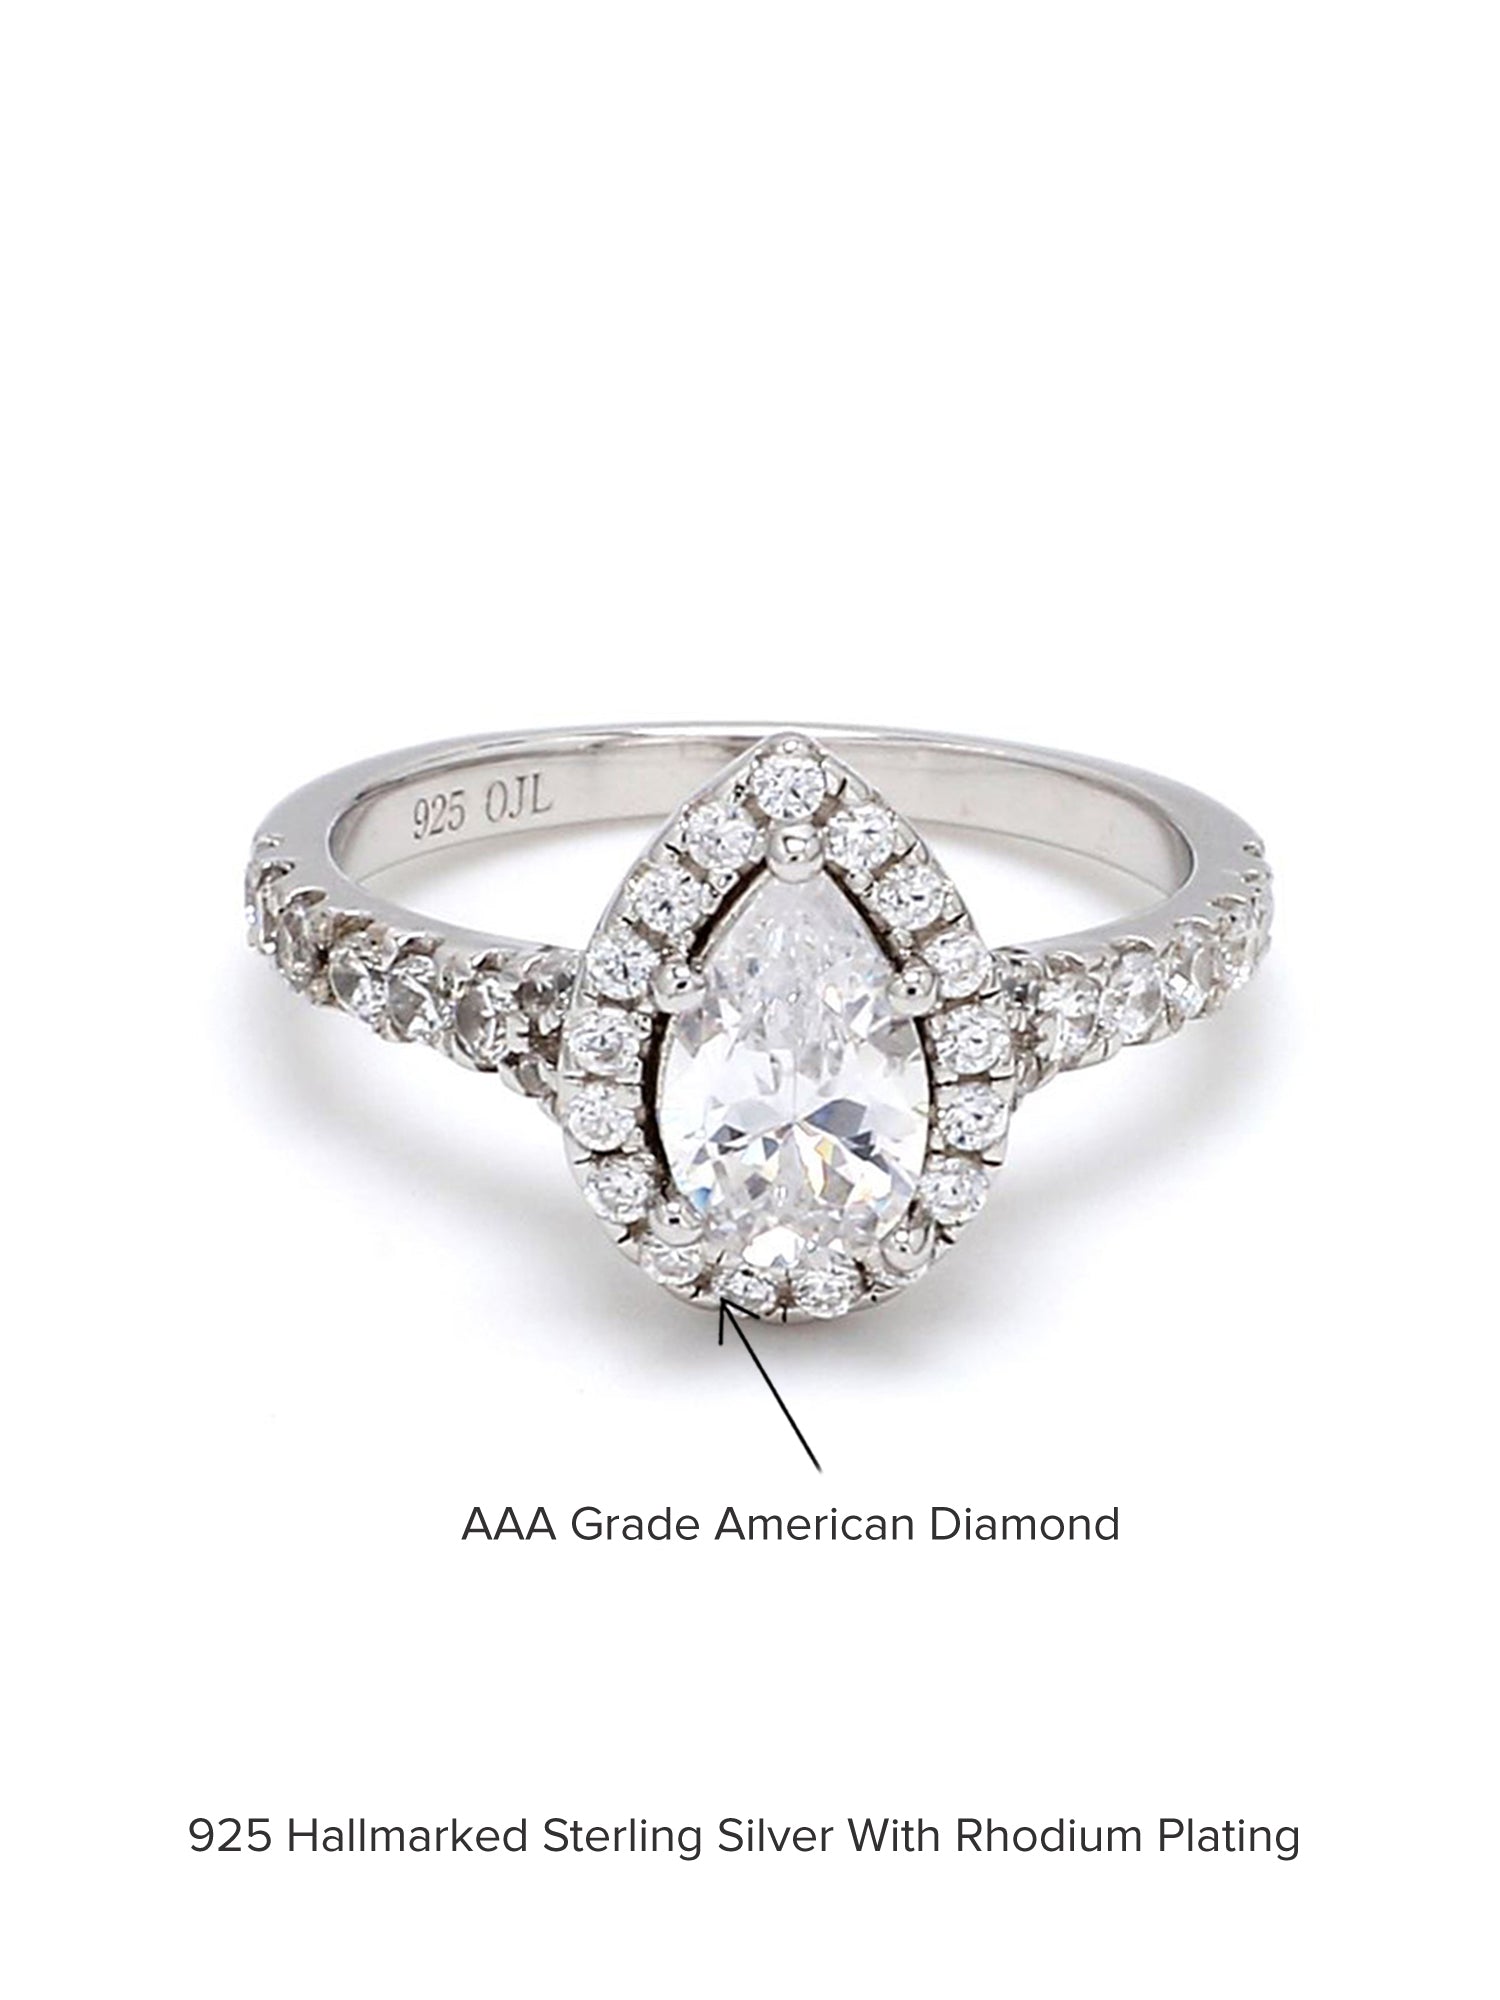 925 SILVER RING IN PEAR SHAPED 0.75 CARAT AMERICAN DIAMOND-5